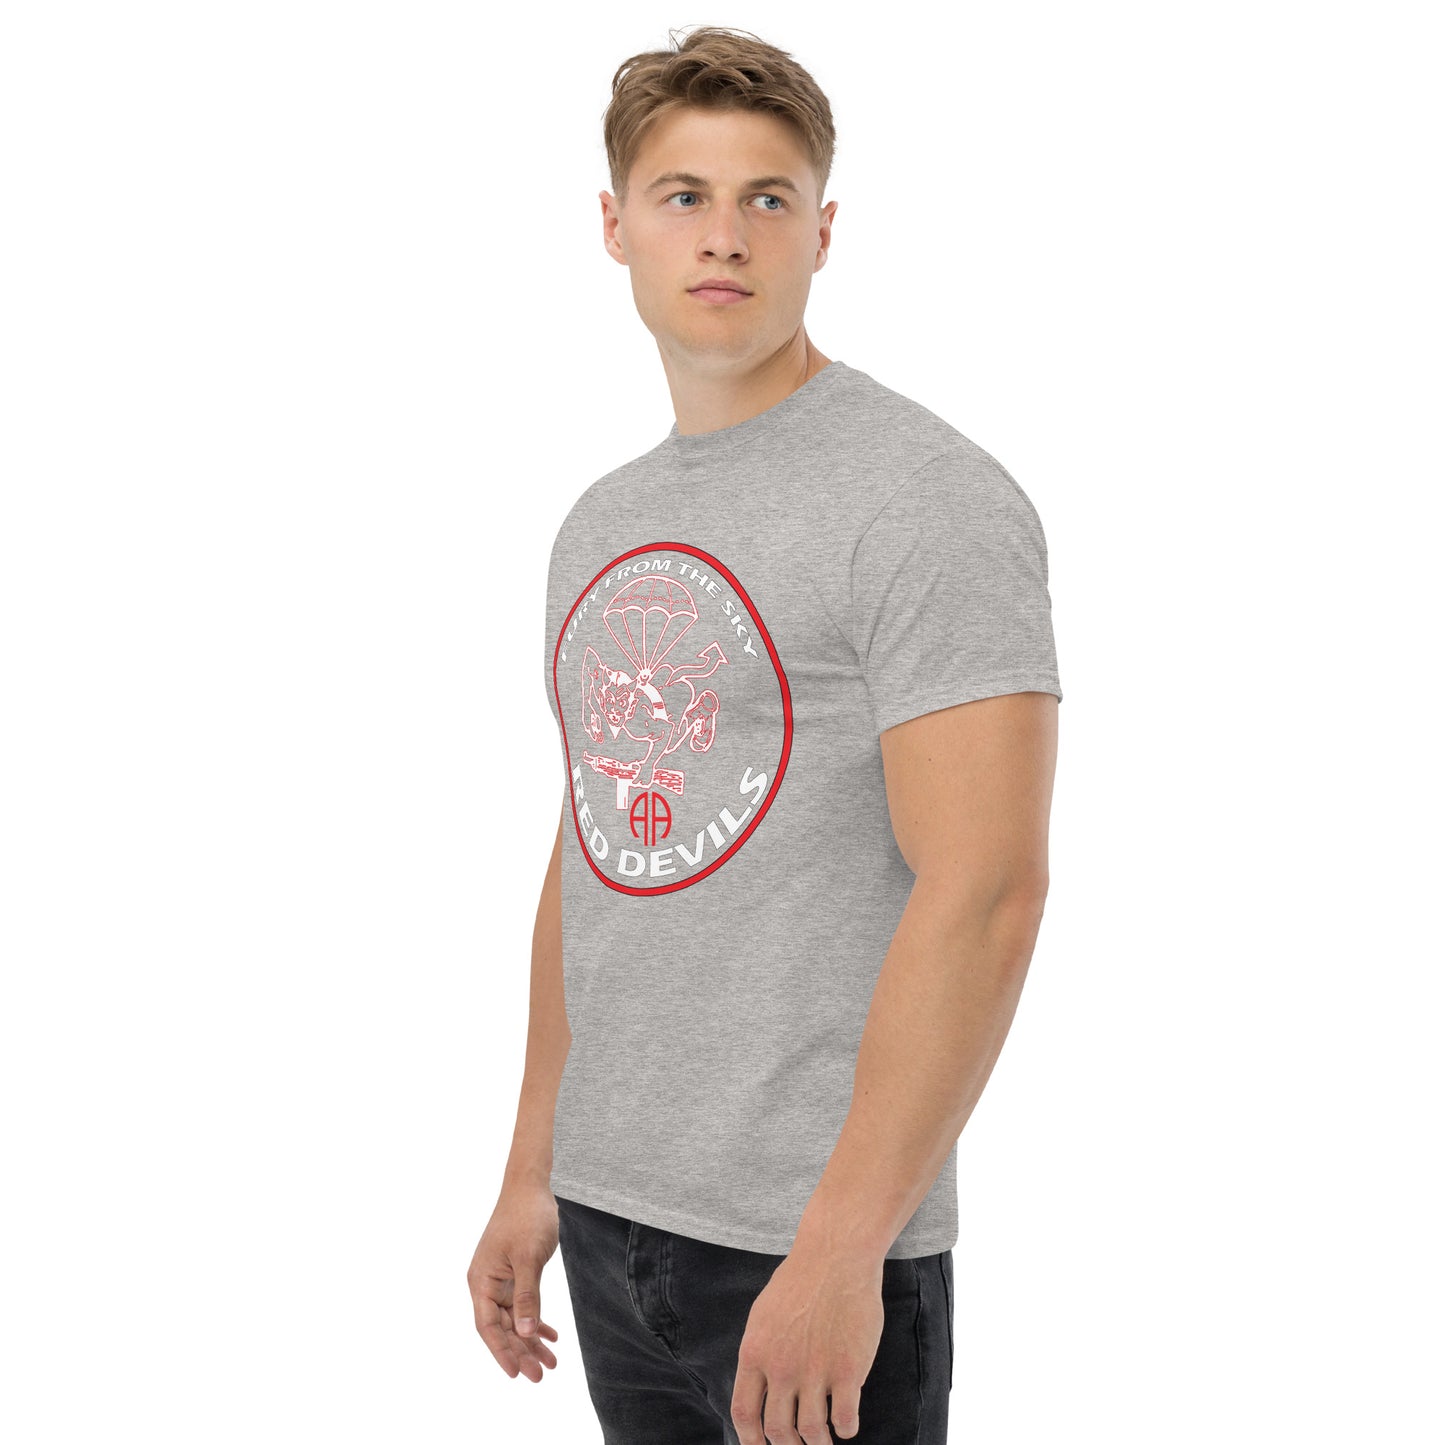 Rep the 508th Parachute Infantry Regiment with this 'Fury From The Sky Tee'. The 100% cotton men's classic tee will help you land a more structured look. It sits nicely, maintains sharp lines around the edges, and goes perfectly with layered streetwear outfits. Plus, it's extra trendy now!